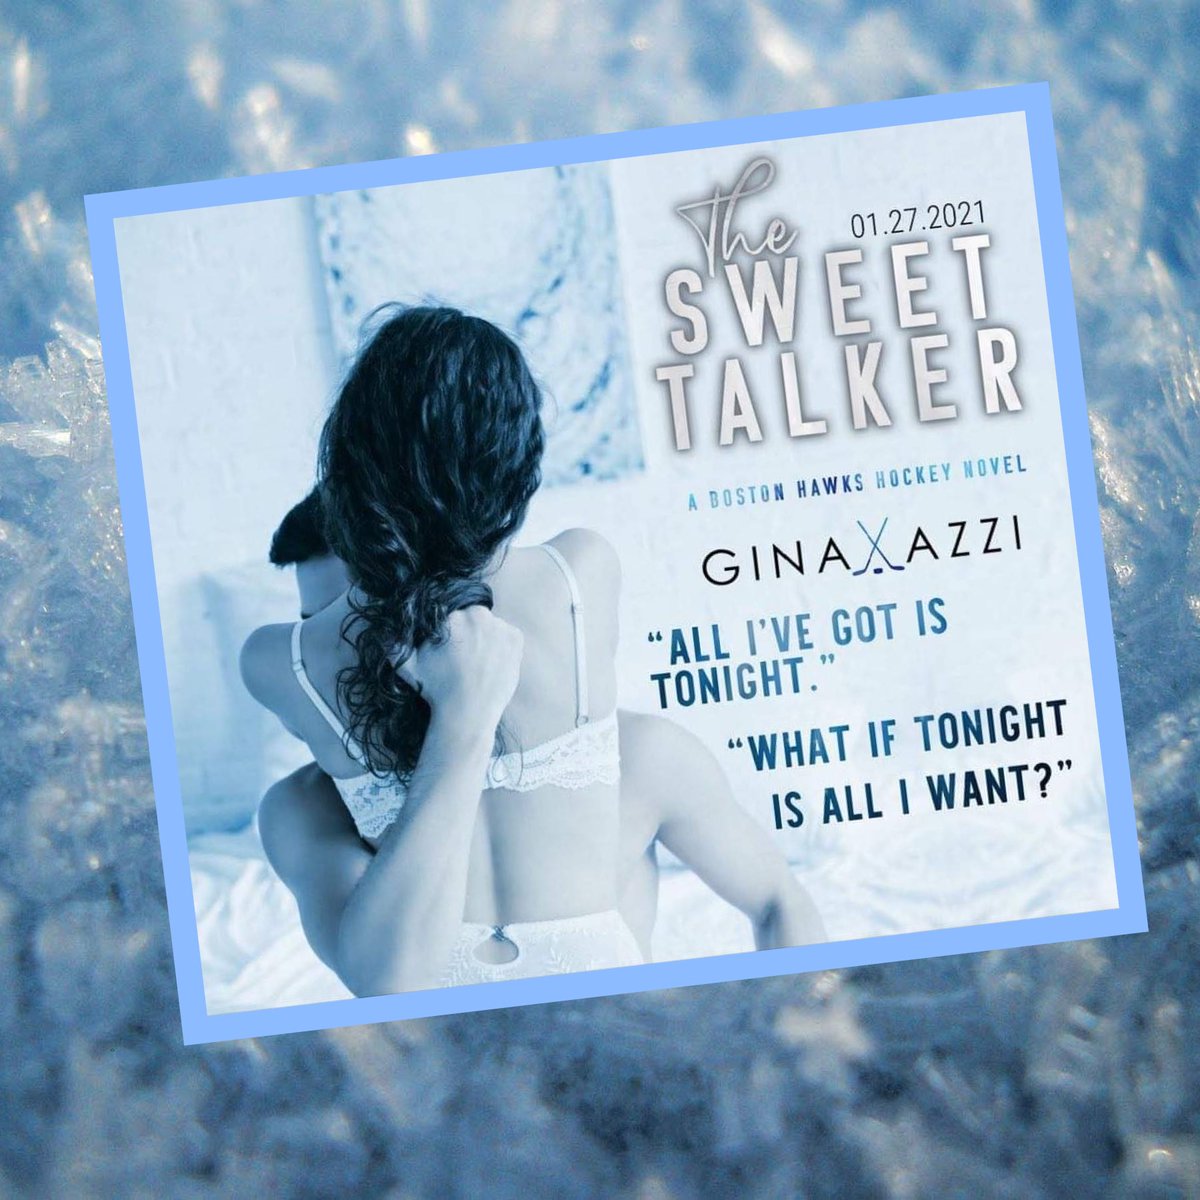 THE SWEET TALKER by @gina_azzi is coming 1/27!
PREORDER THE SWEET TALKER TODAY!
Amazon: bit.ly/TheSweetTalker…
Amazon Universal: mybook.to/TheSweetTalker
Apple: bit.ly/TheSweetTalker…
Nook: bit.ly/TheSweetTalker…
Kobo: bit.ly/TheSweetTalker…
Google: bit.ly/TheSweetTalker…